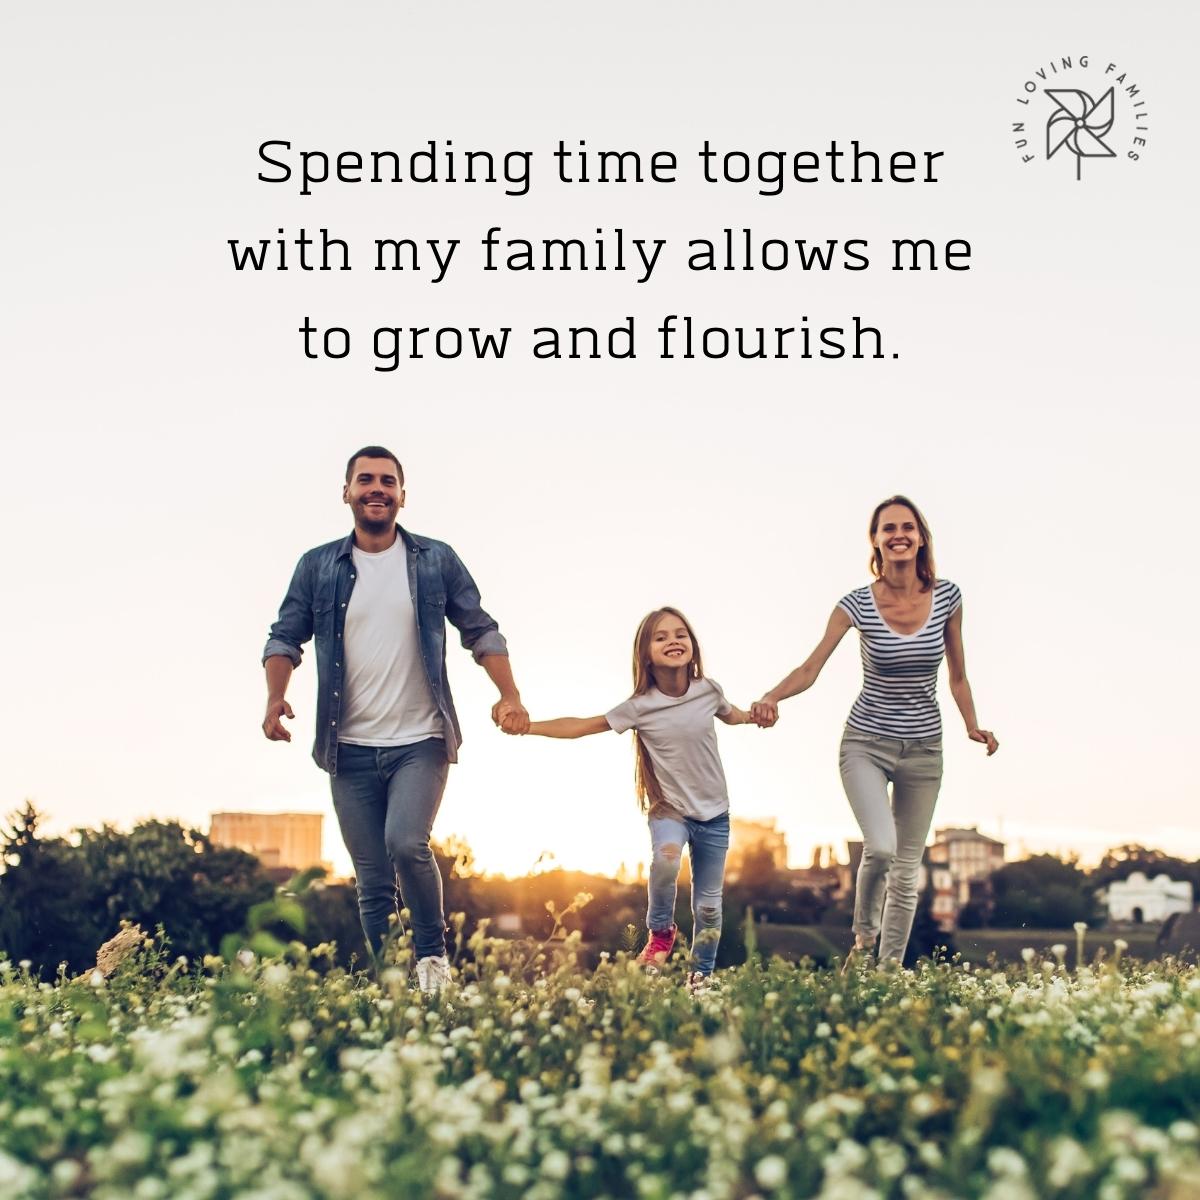 Spending time together with my family allows me to grow and flourish affirmation